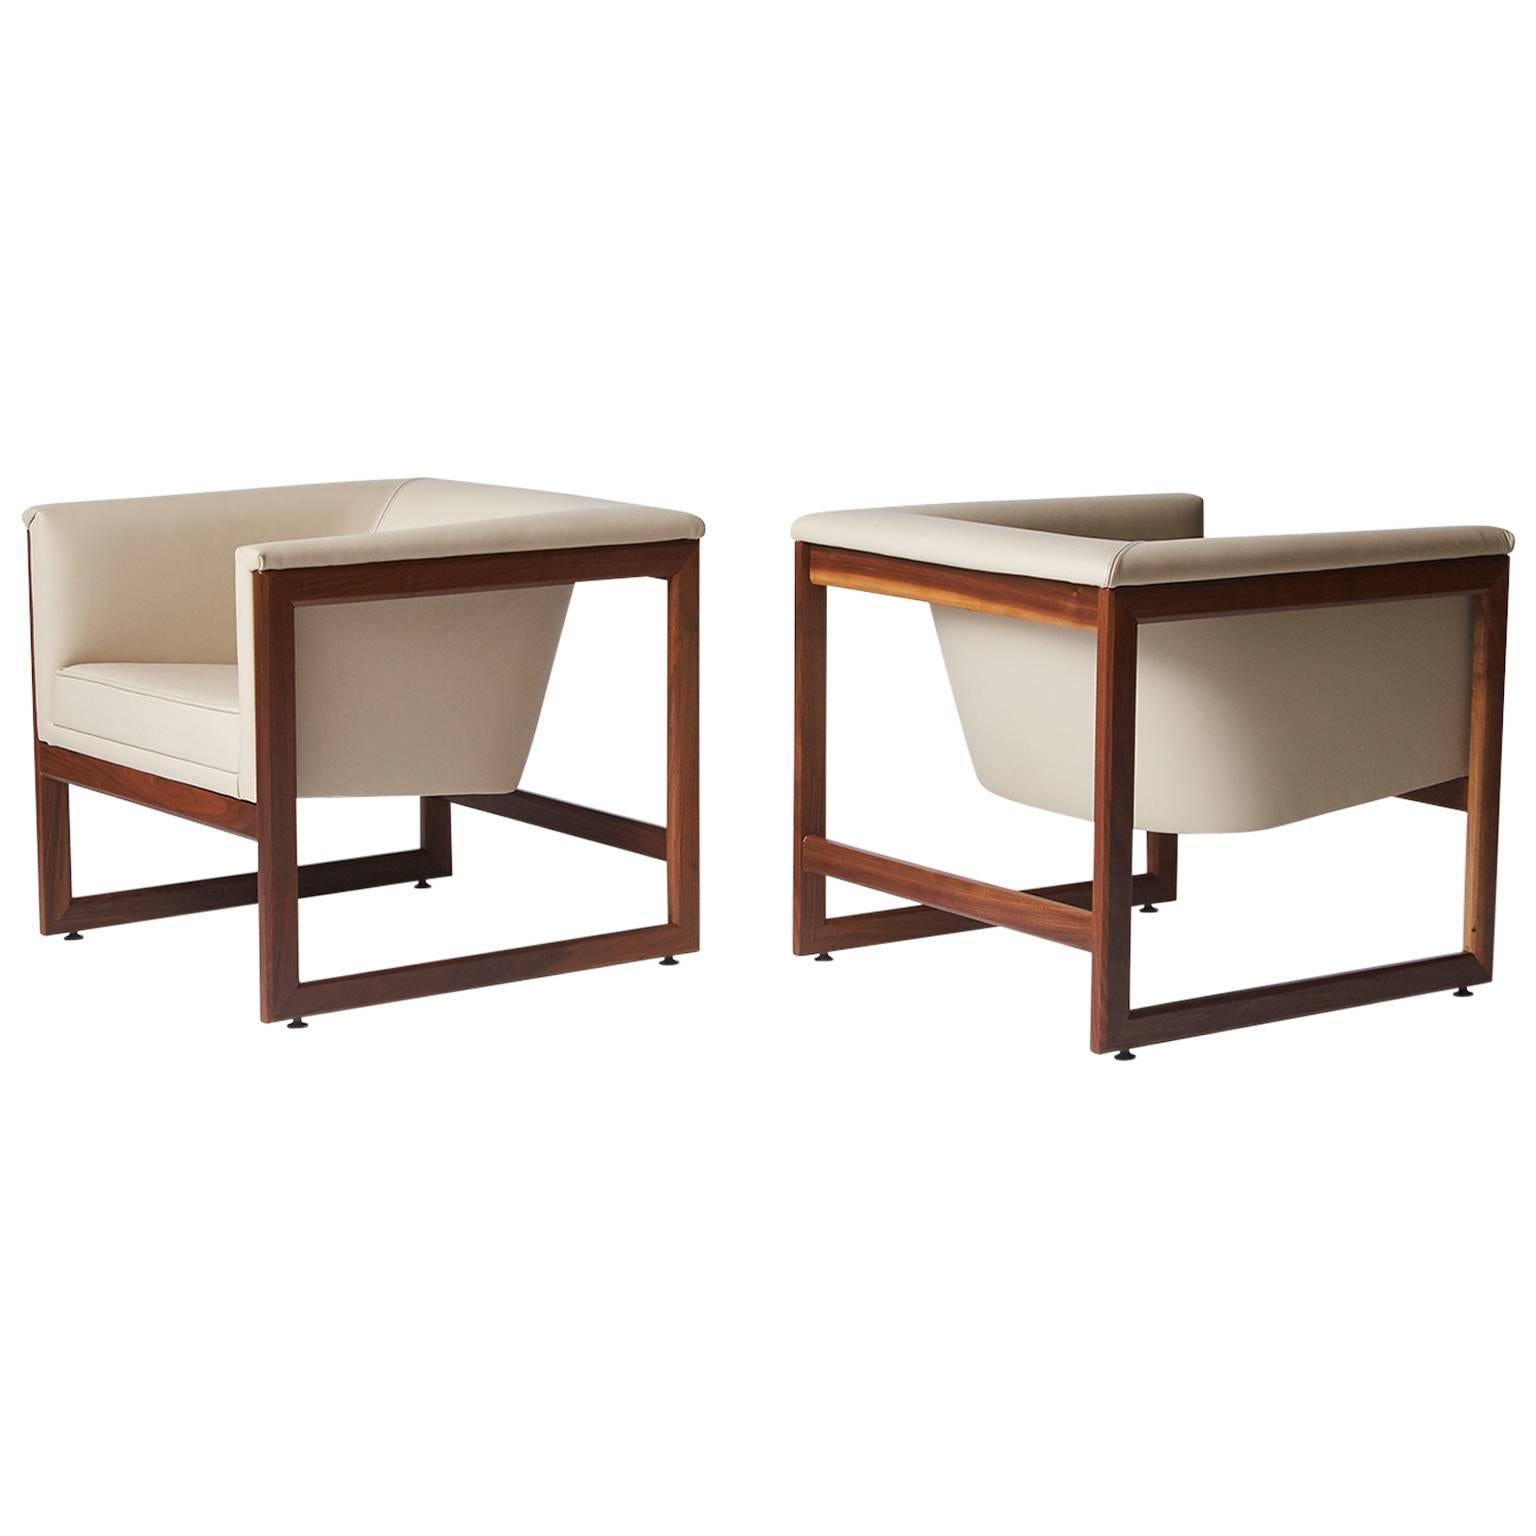 Pair of Floating Cube Chairs by Milo Baughman